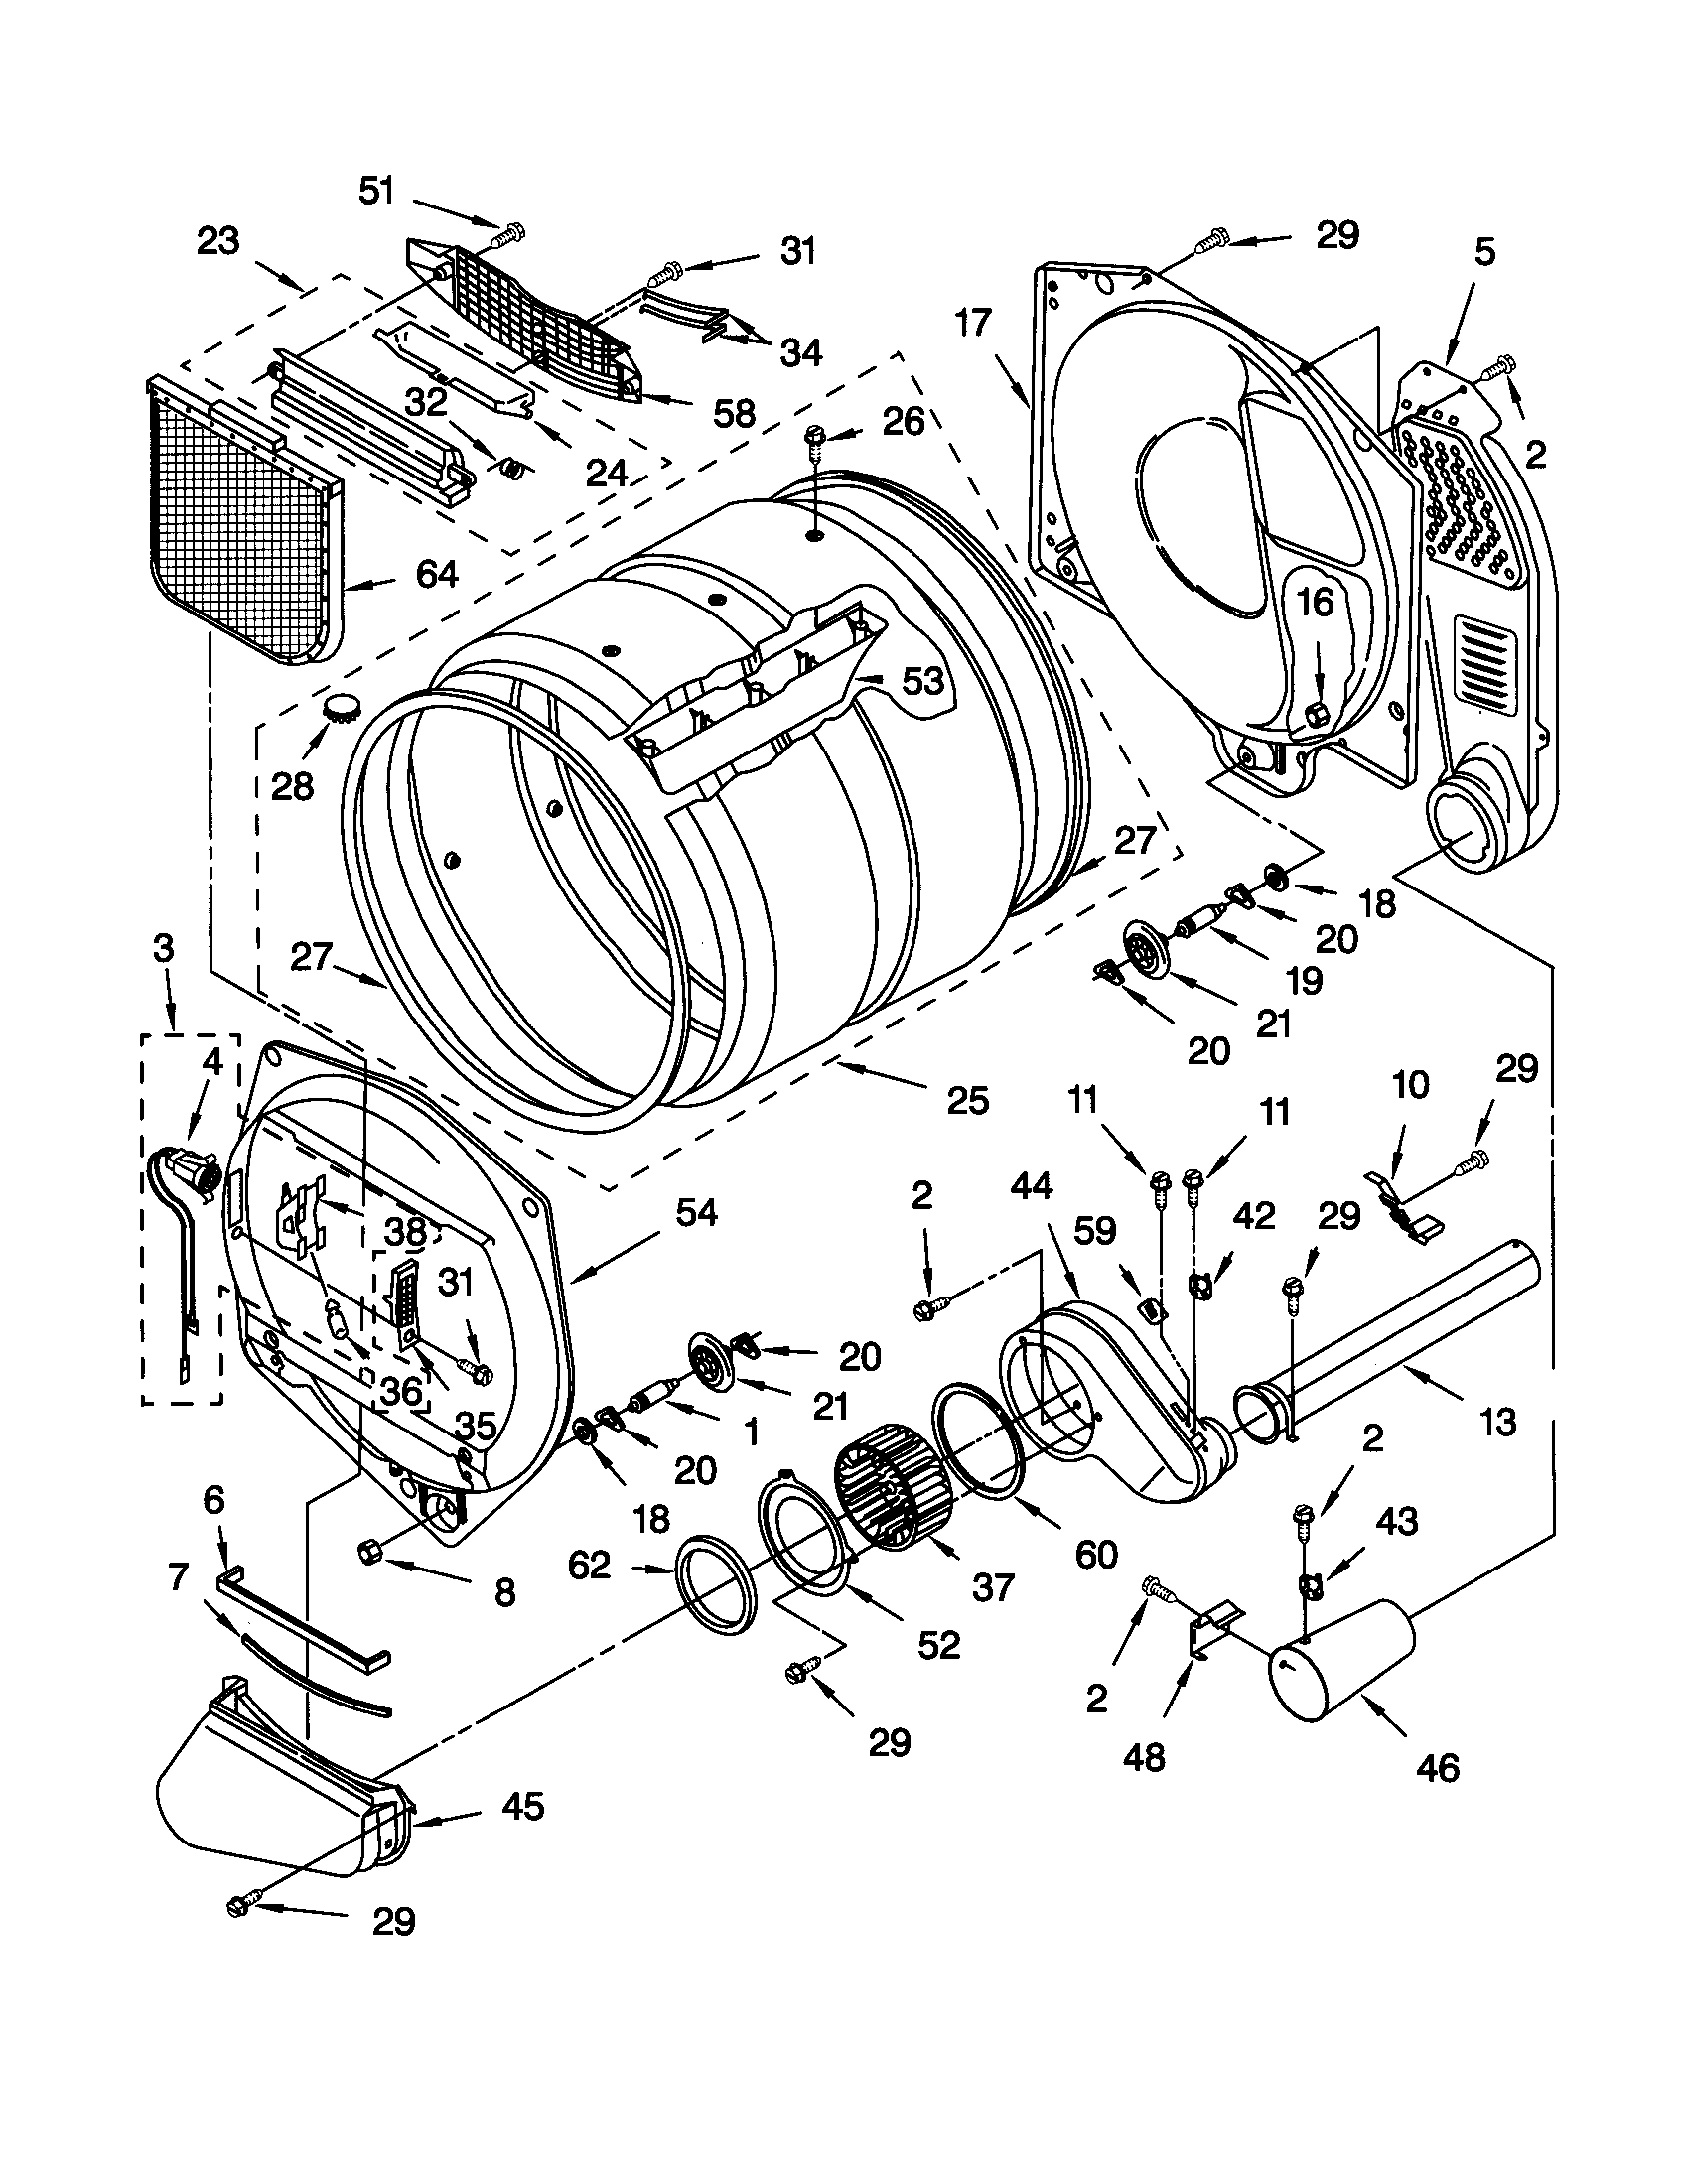 Kenmore Dryer Model Wiring Diagram Collection